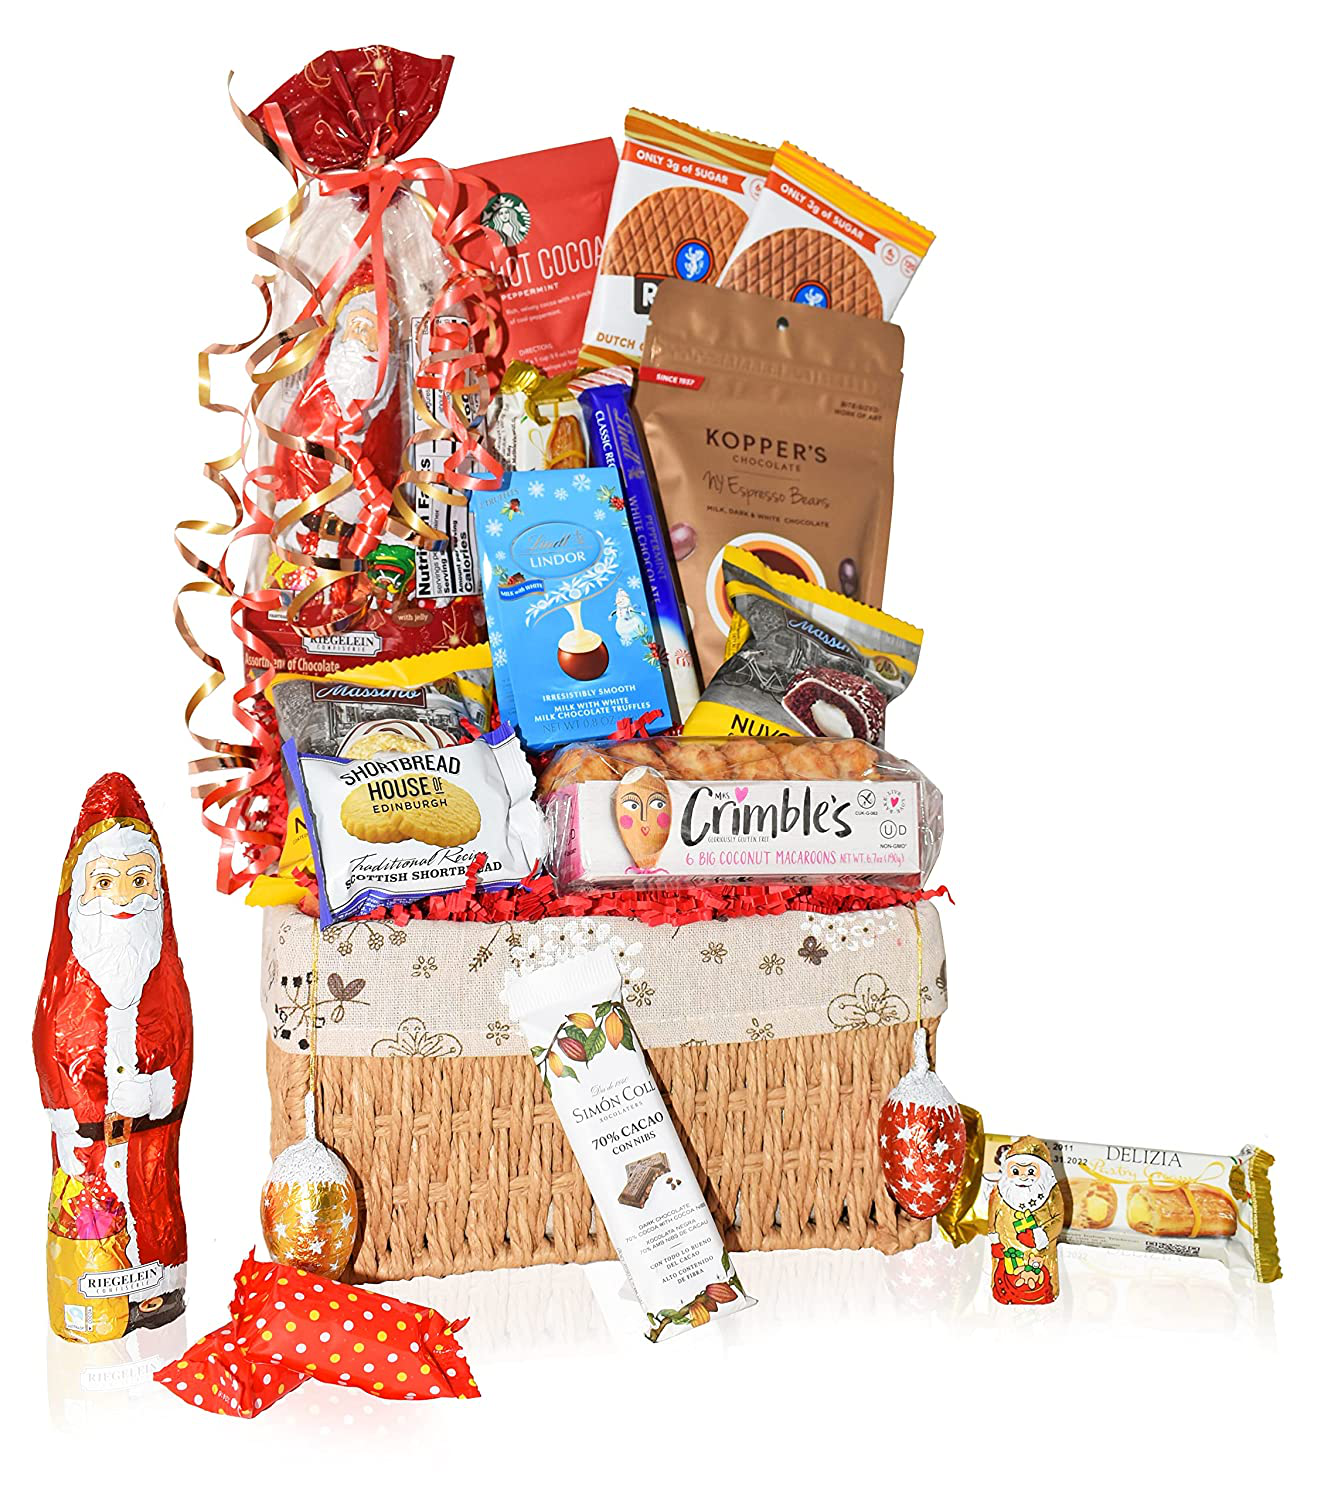 Christmas Baskets - Macaroons, Chocolate, Santa, Walkers, Holiday - Premium Gift Baskets for Family, Friends, Colleagues, Office, Men, Women, Corporate, Him, Her